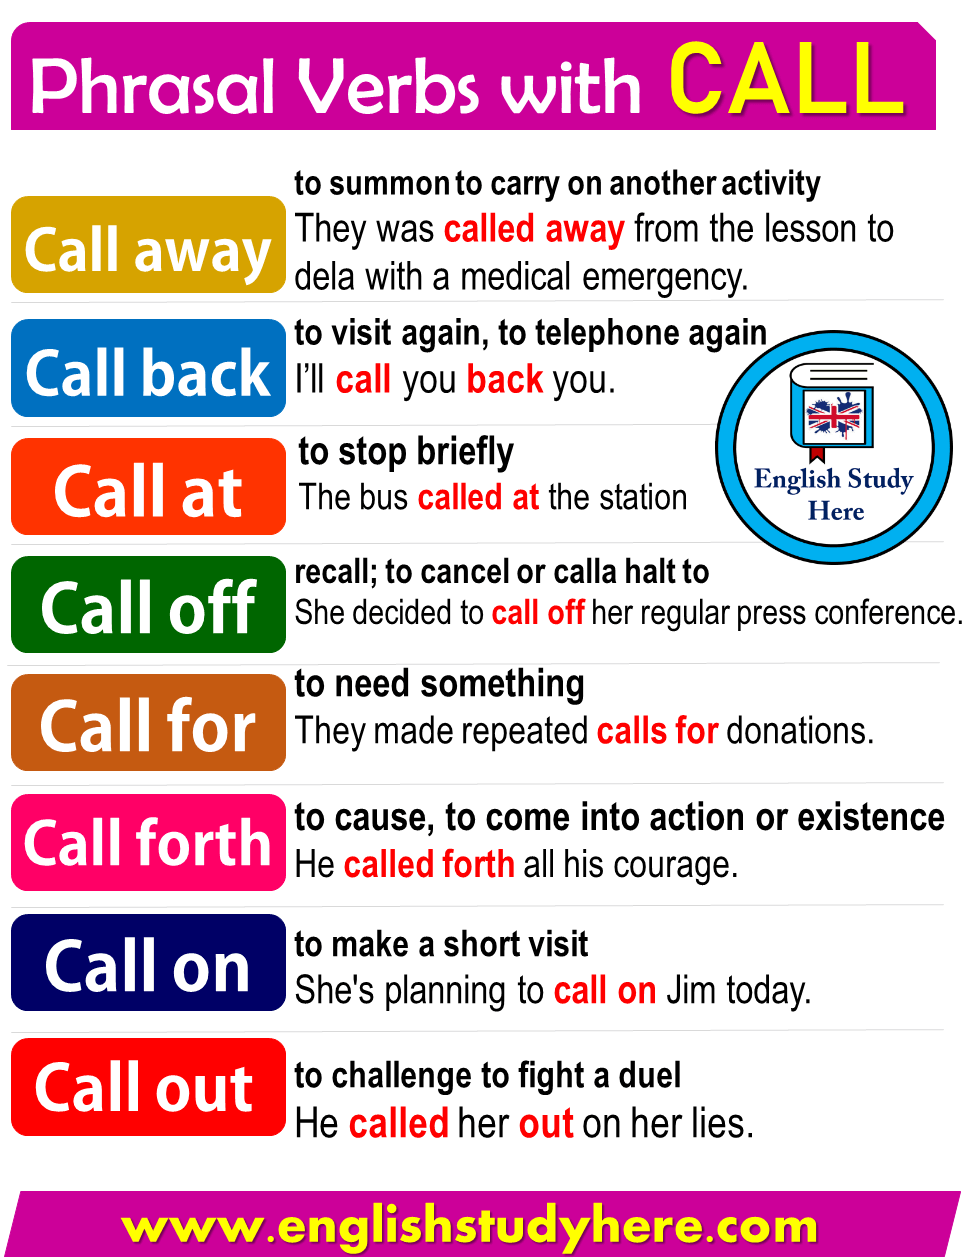 Call for phrasal verb meaning